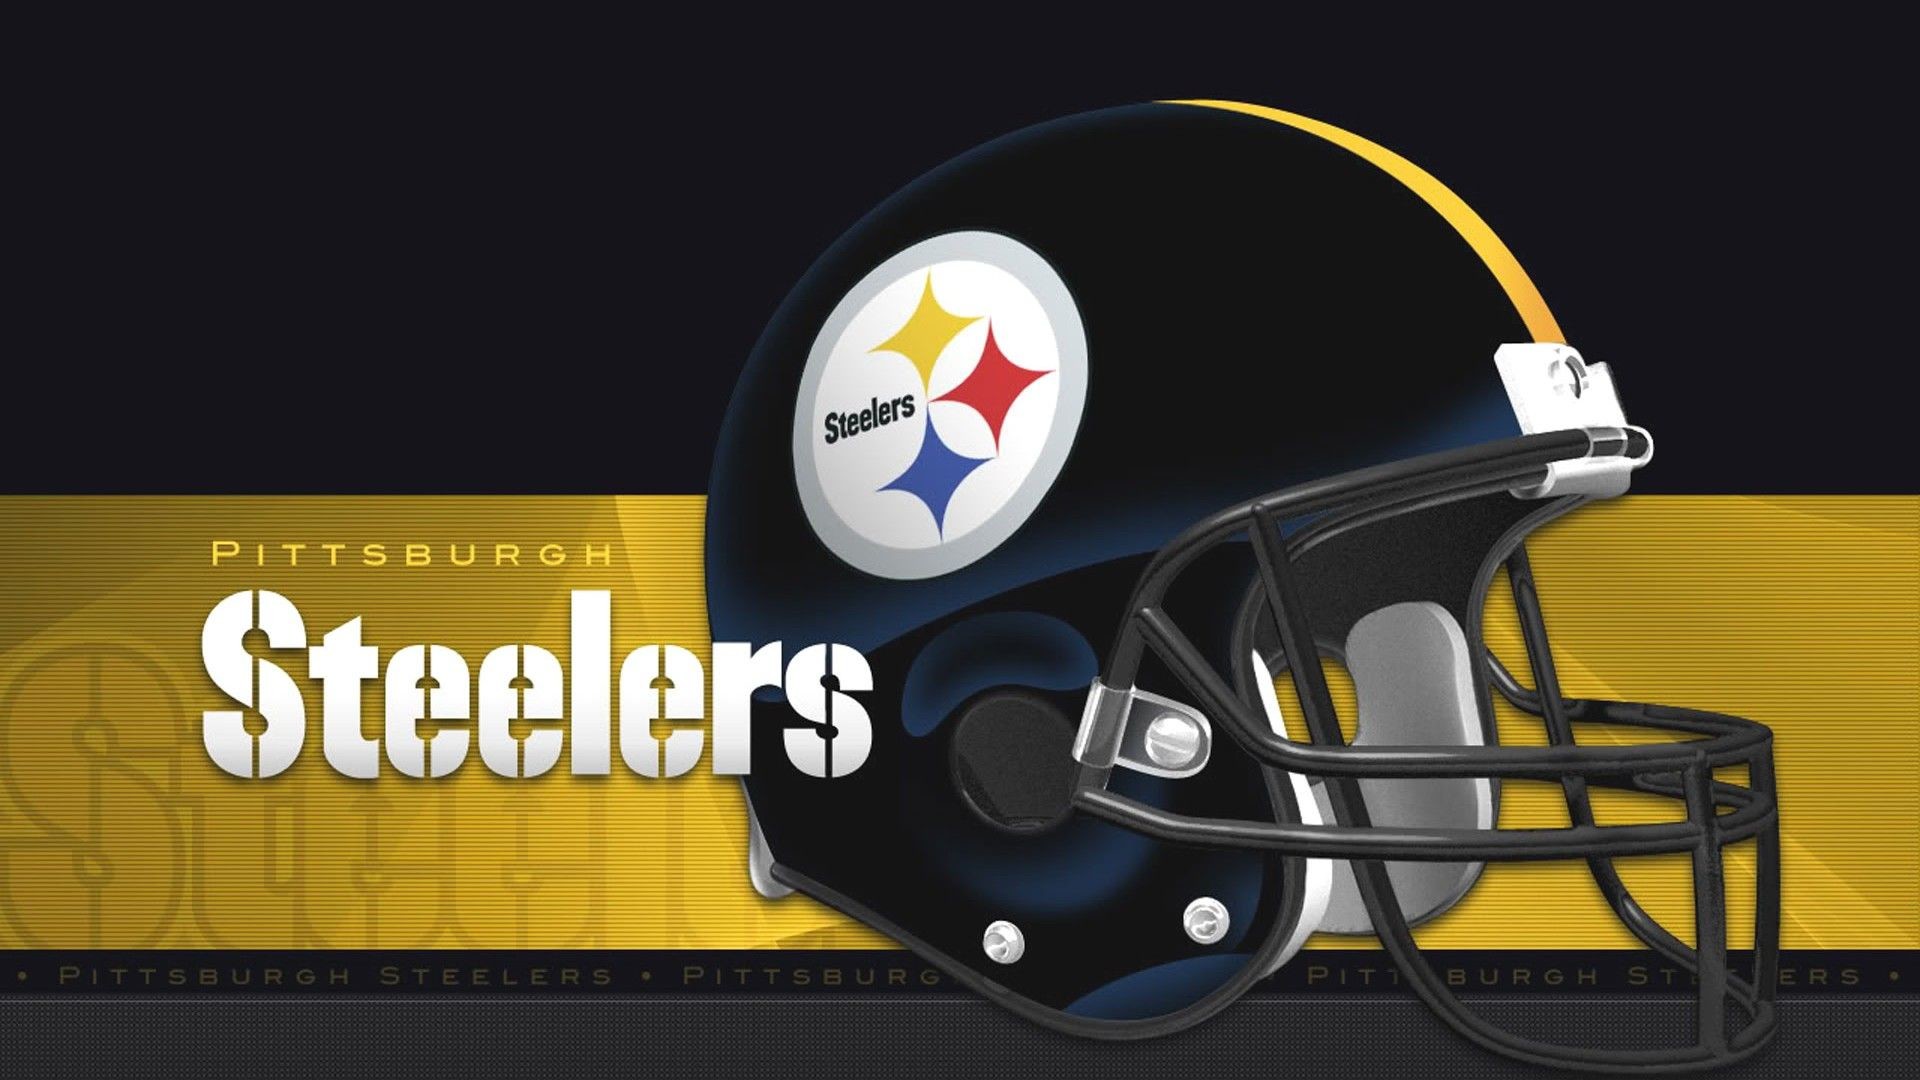 1920x1080 Pittsburgh Steelers Wallpaper For Mac Backgrounds | Best NFL Wallpapers